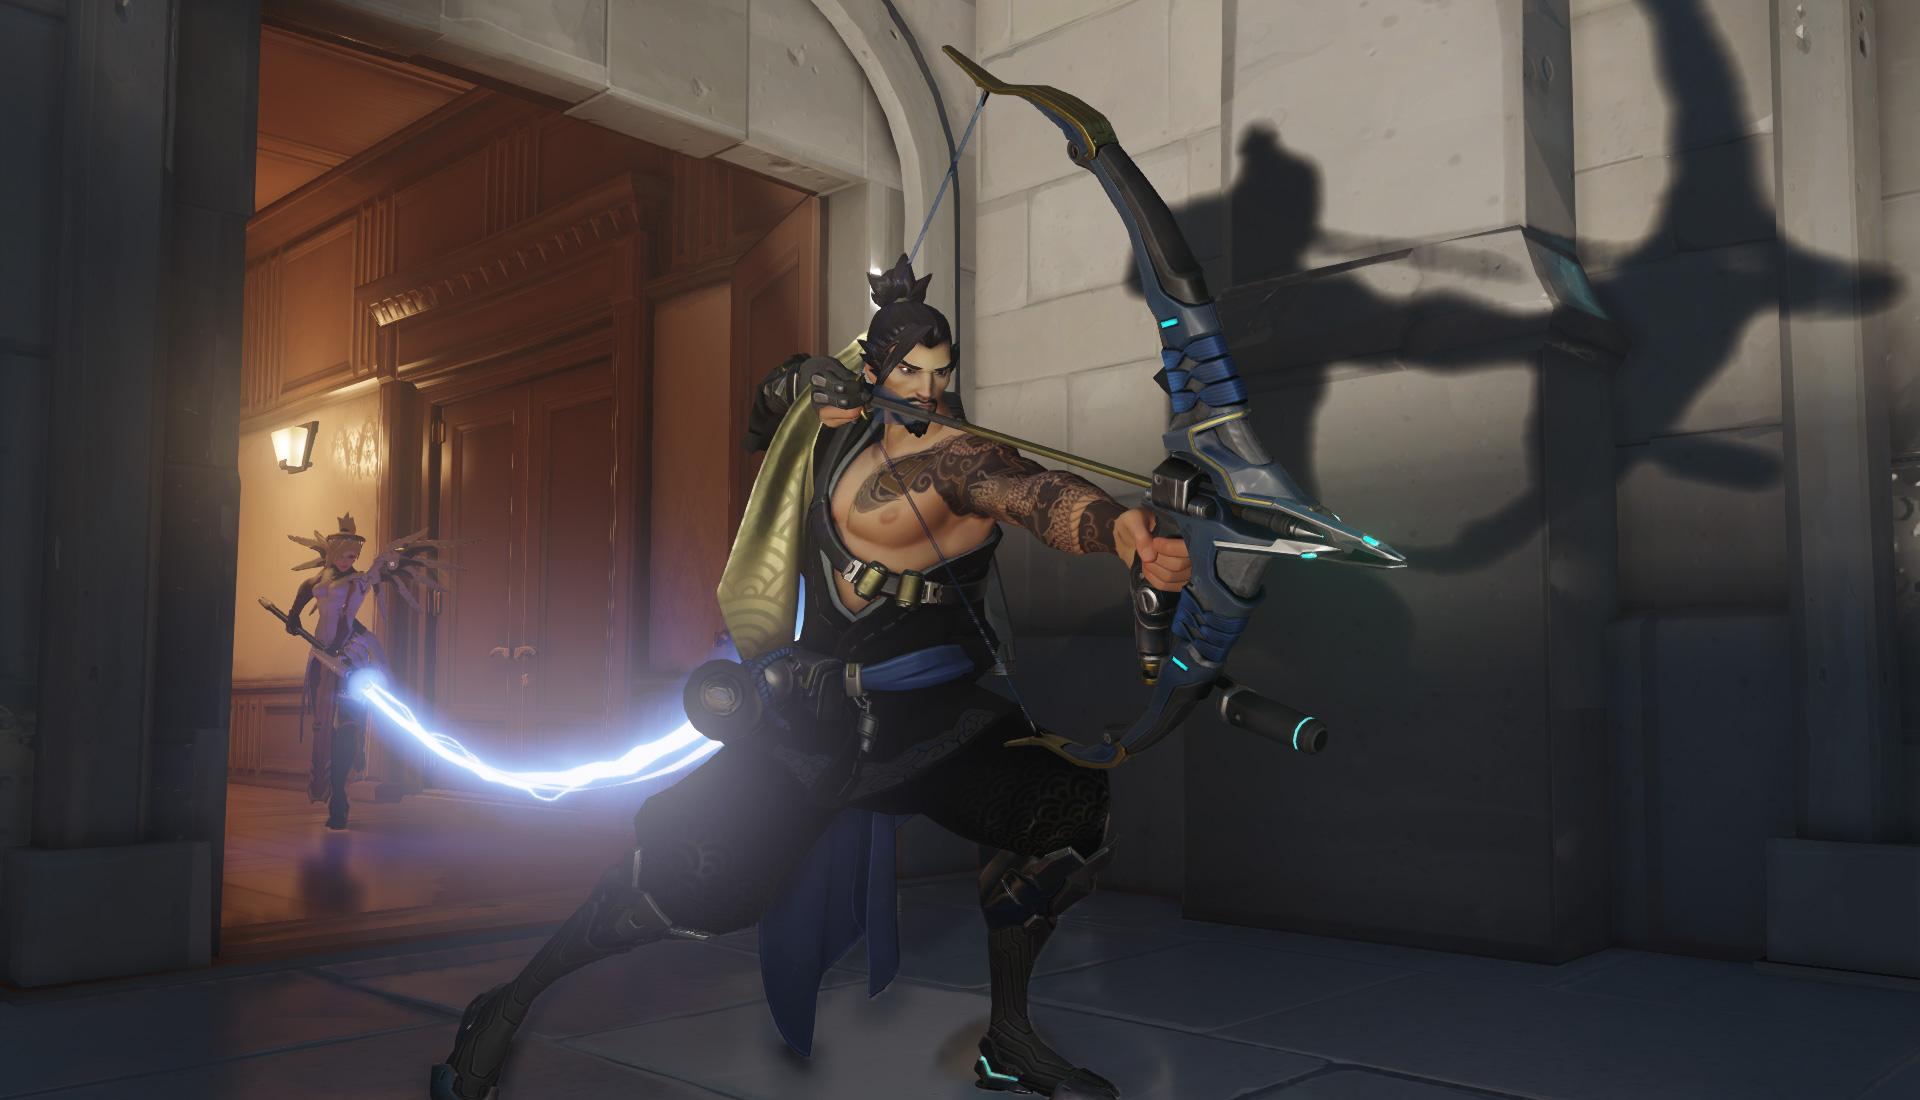 Overwatch’s Hanzo Mains Don’t Think They Deserve All The Hate